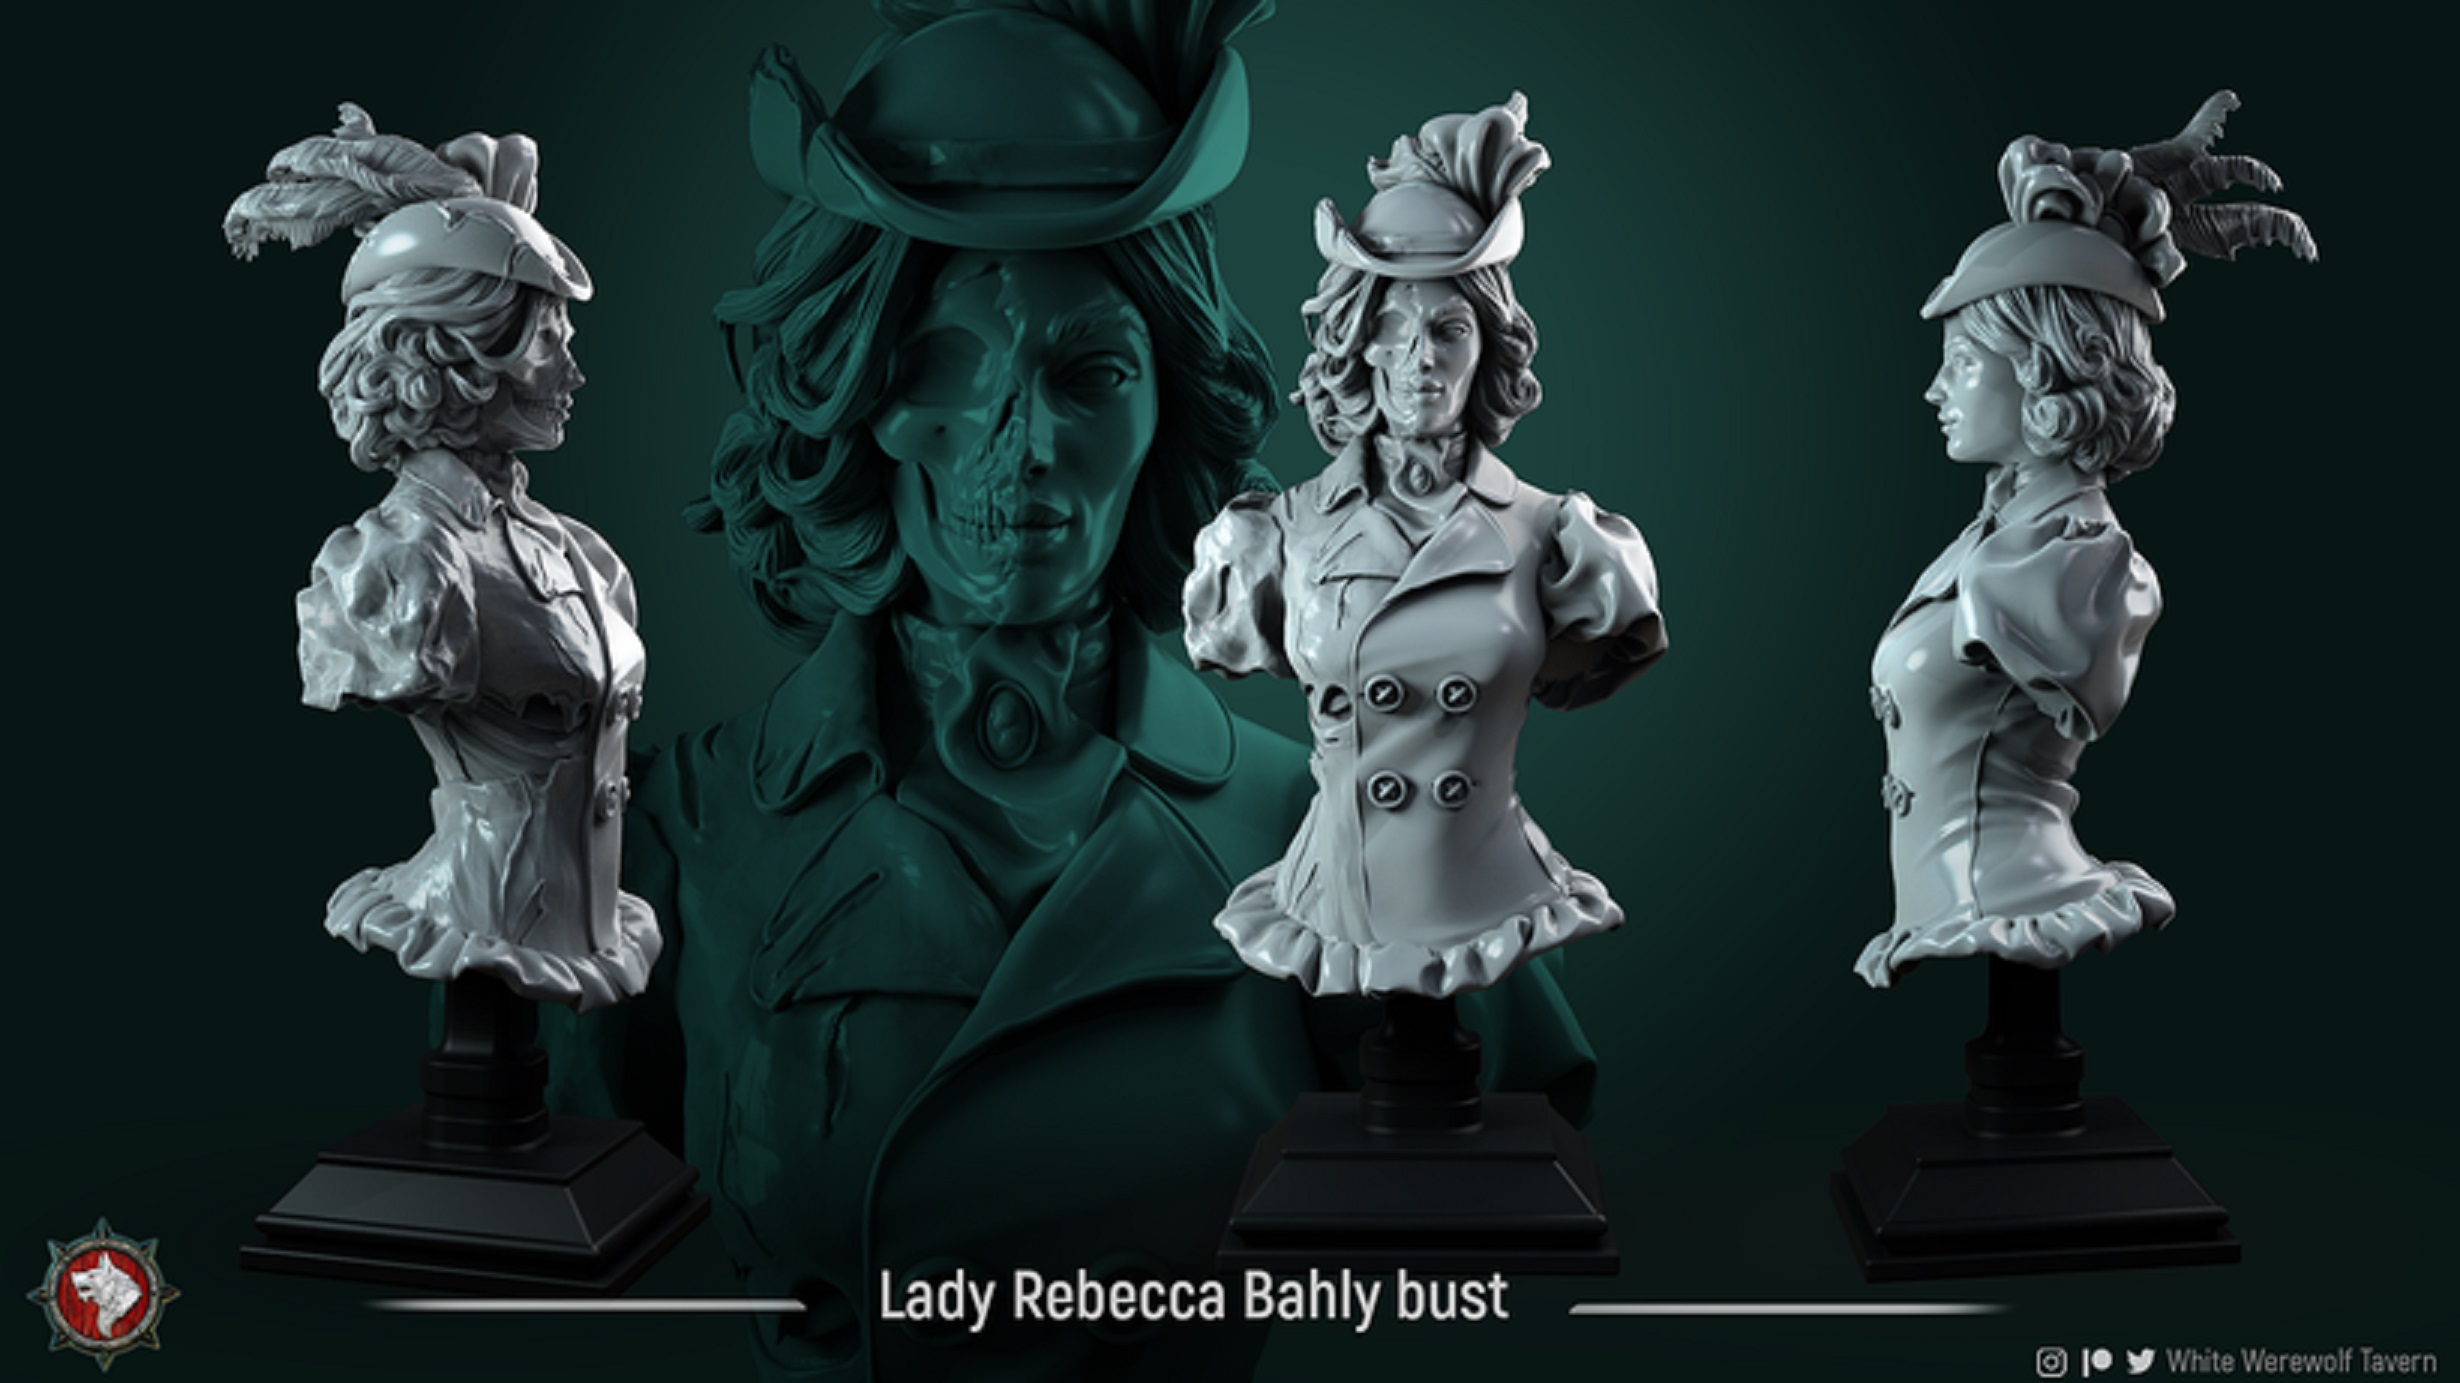 Lady Rebecca Bahly bust